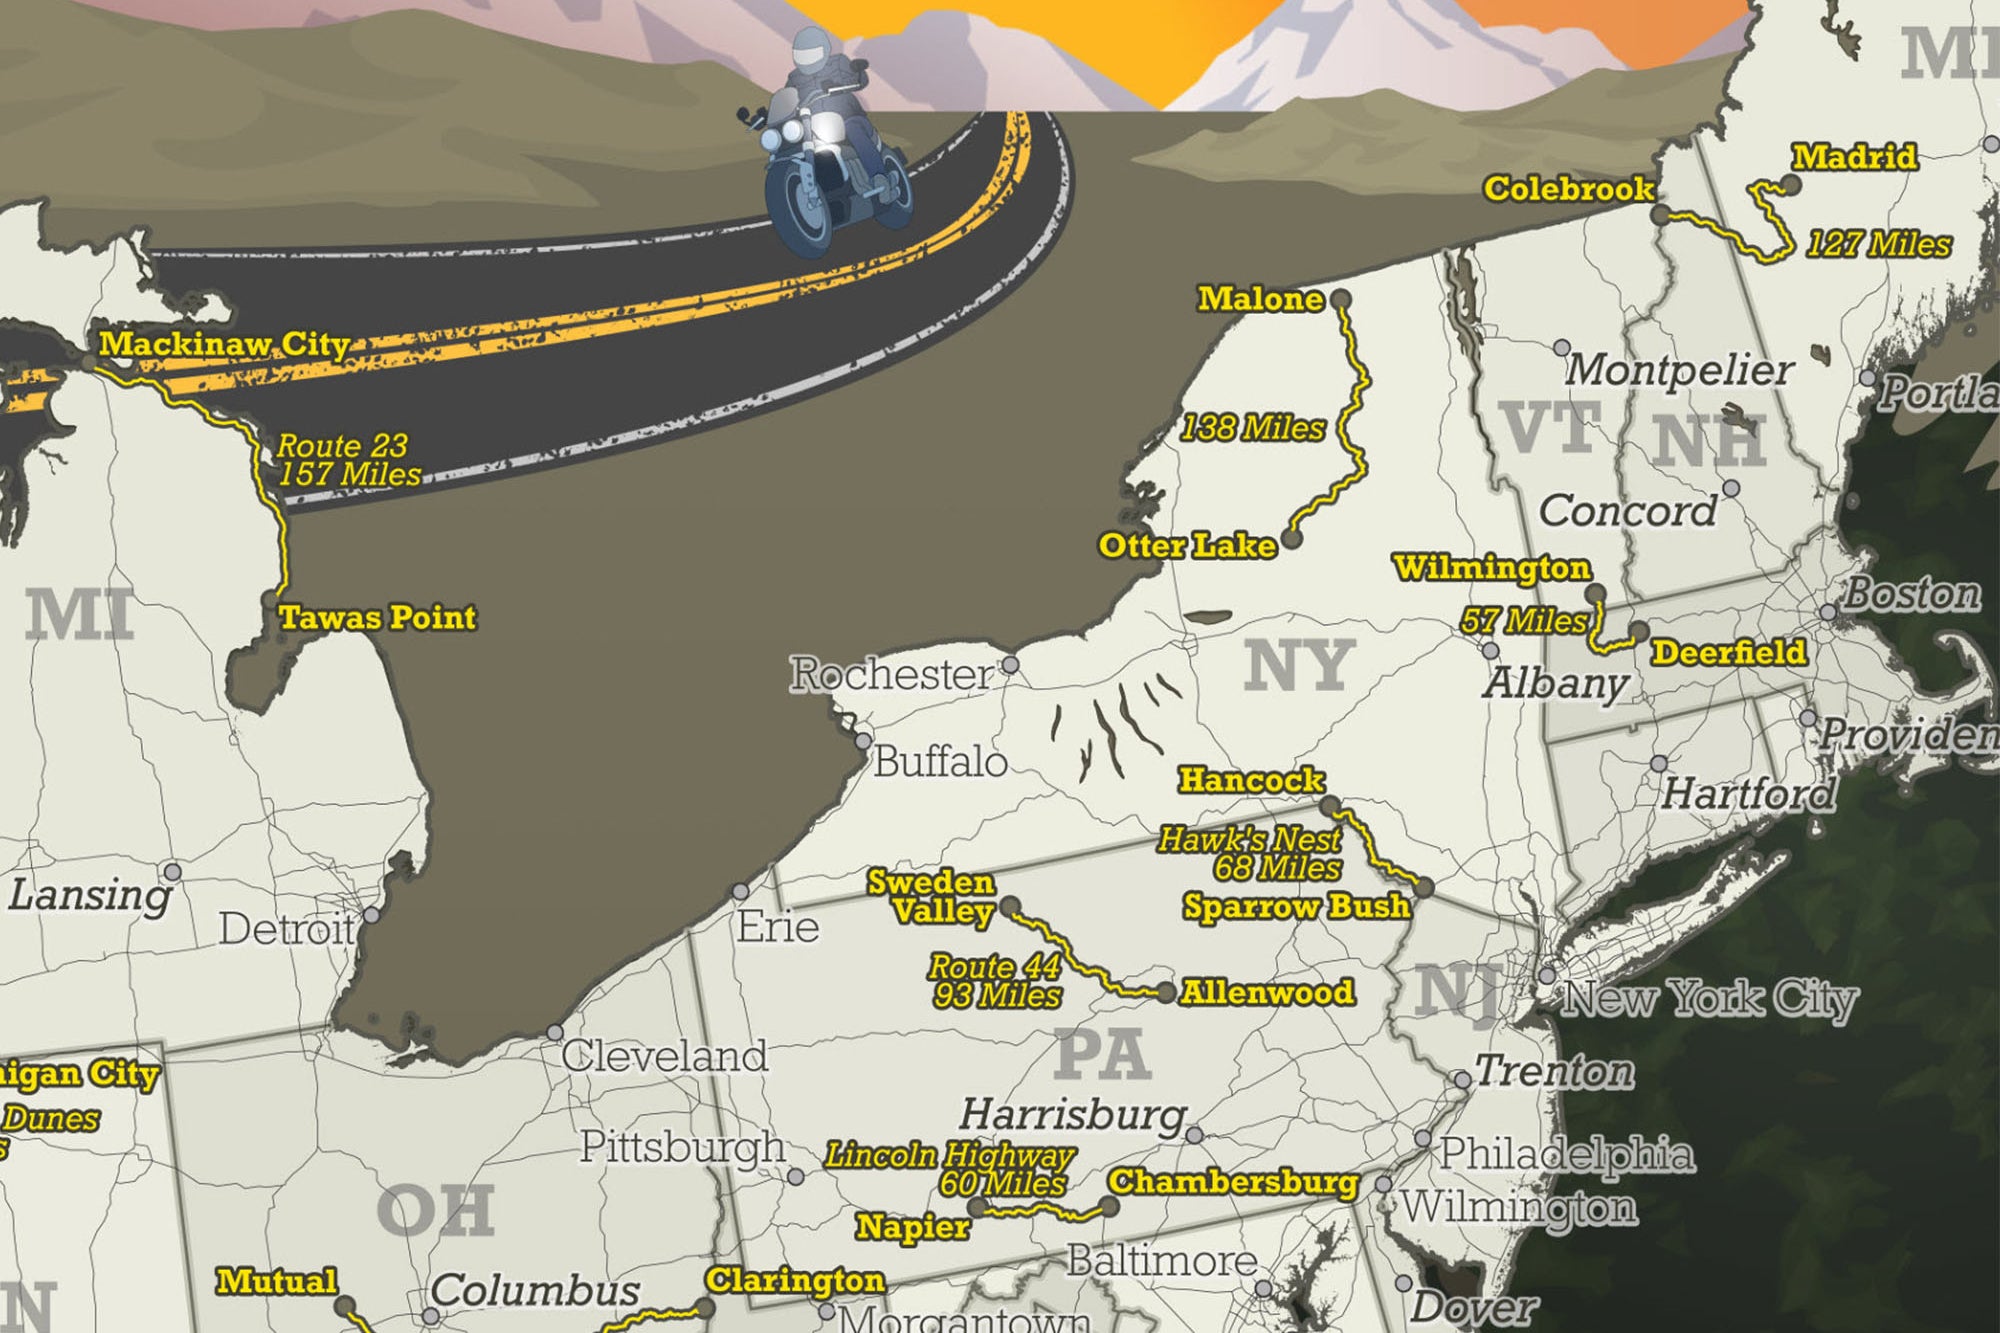 Top 50 Motorcycle Road trips in the USA